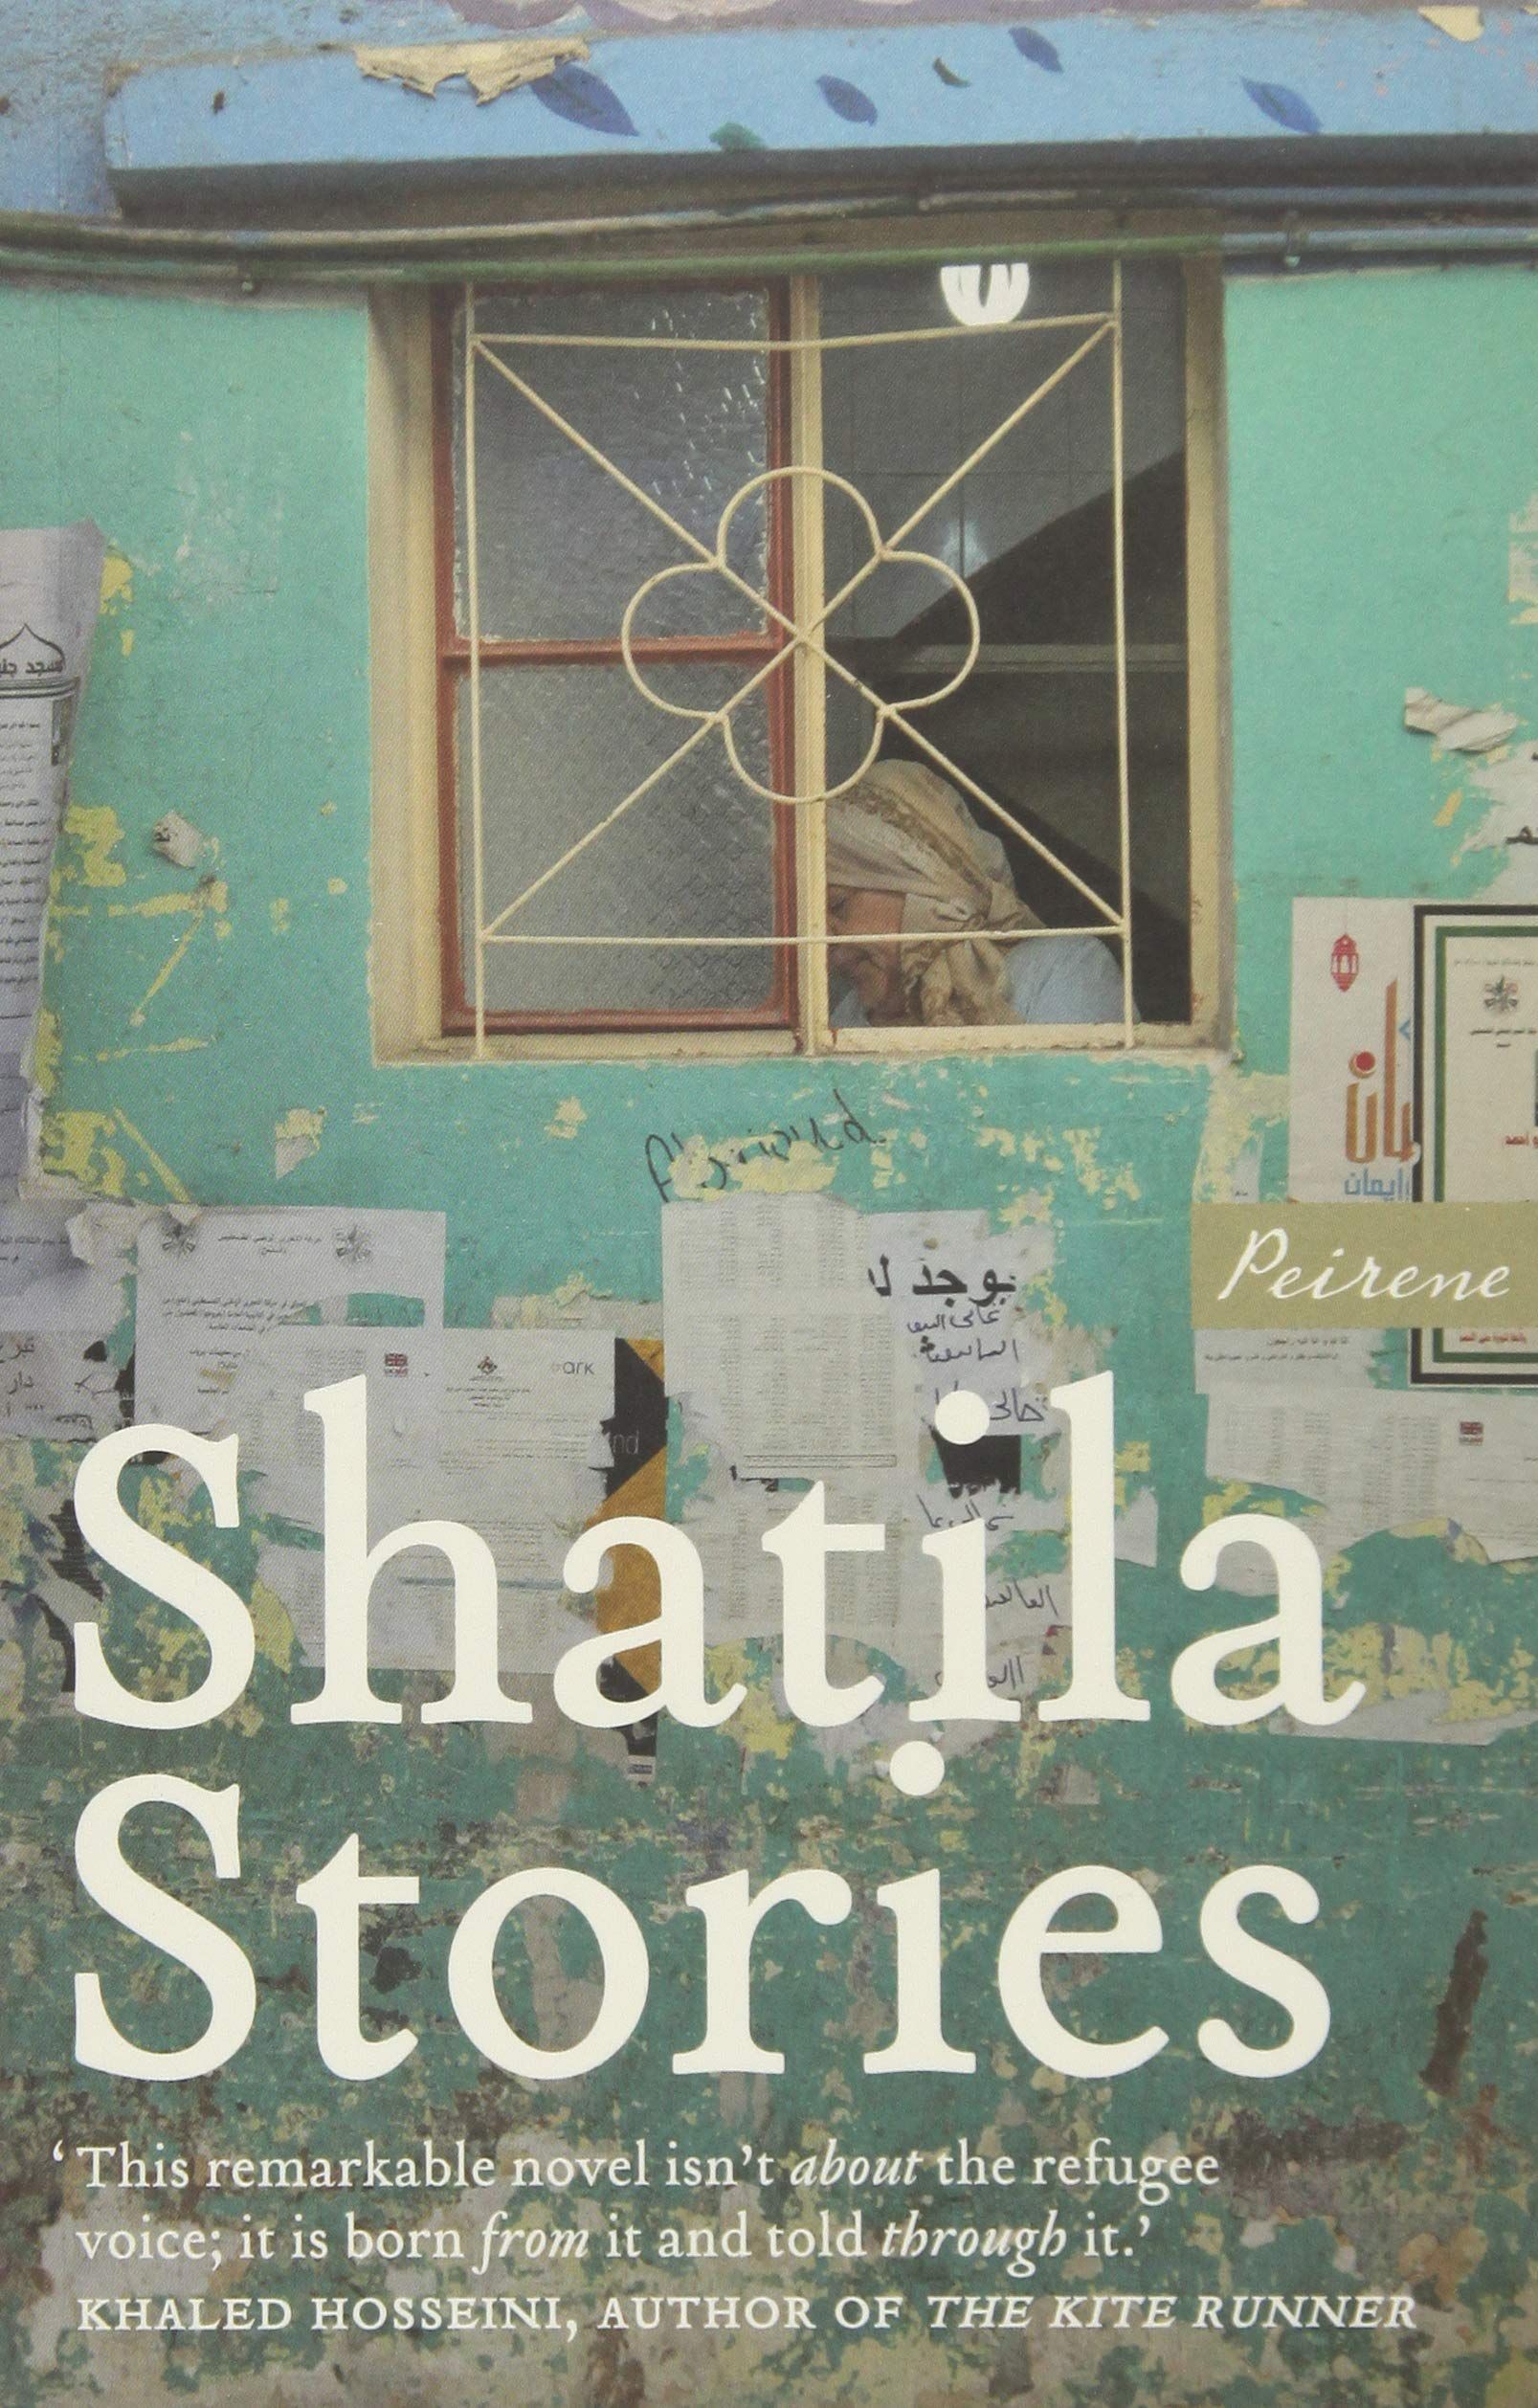 A Hymn to Life: On “Shatila Stories”